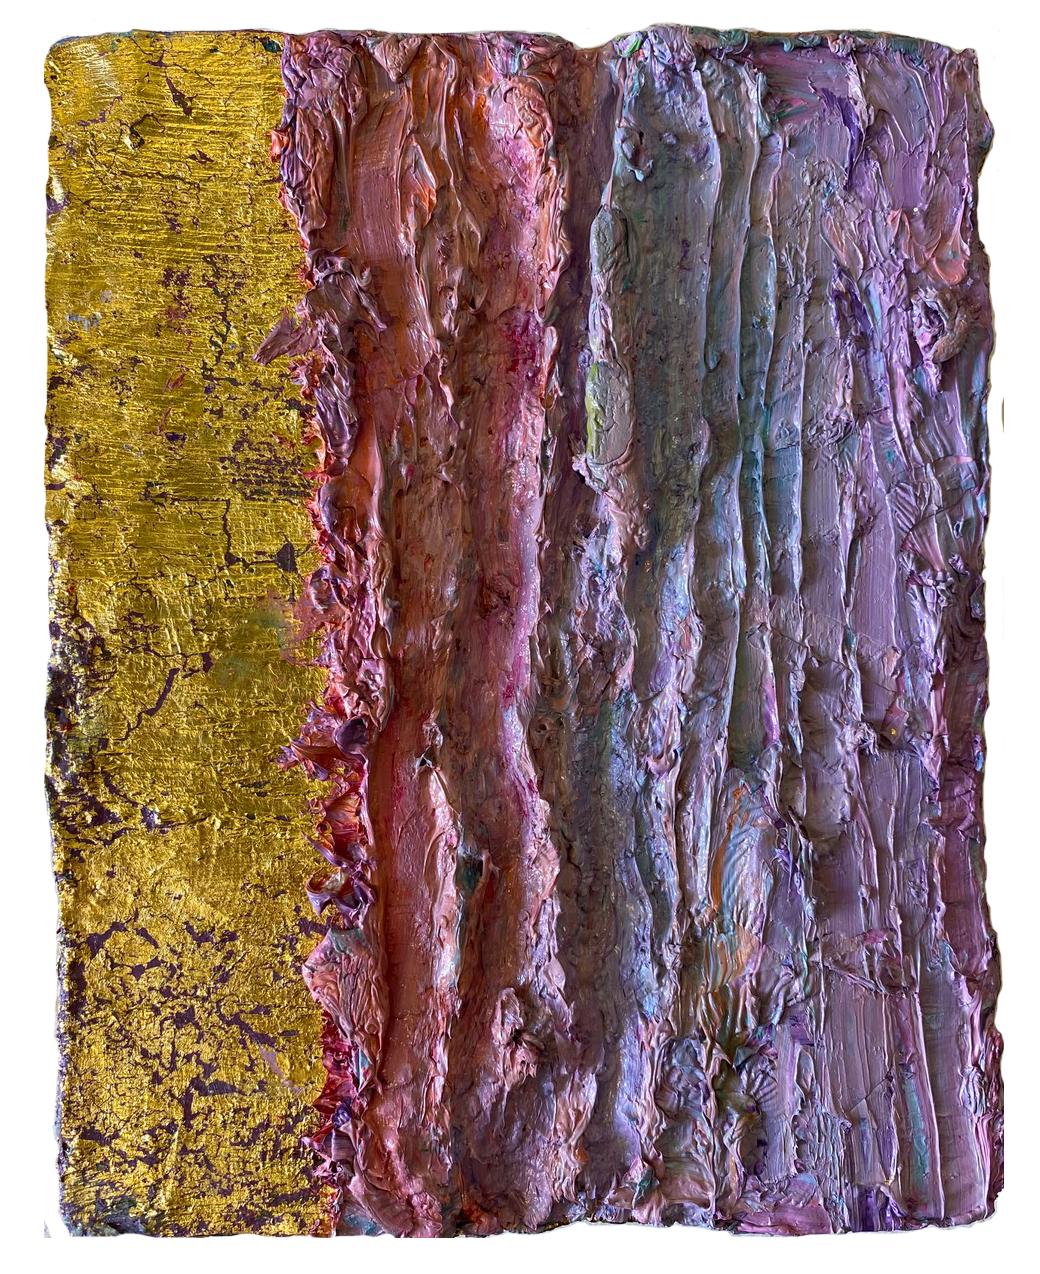 Color Boundaries #35. Abstract painting on canvas, mounted on a stretcher. - Painting by Natasha Zupan